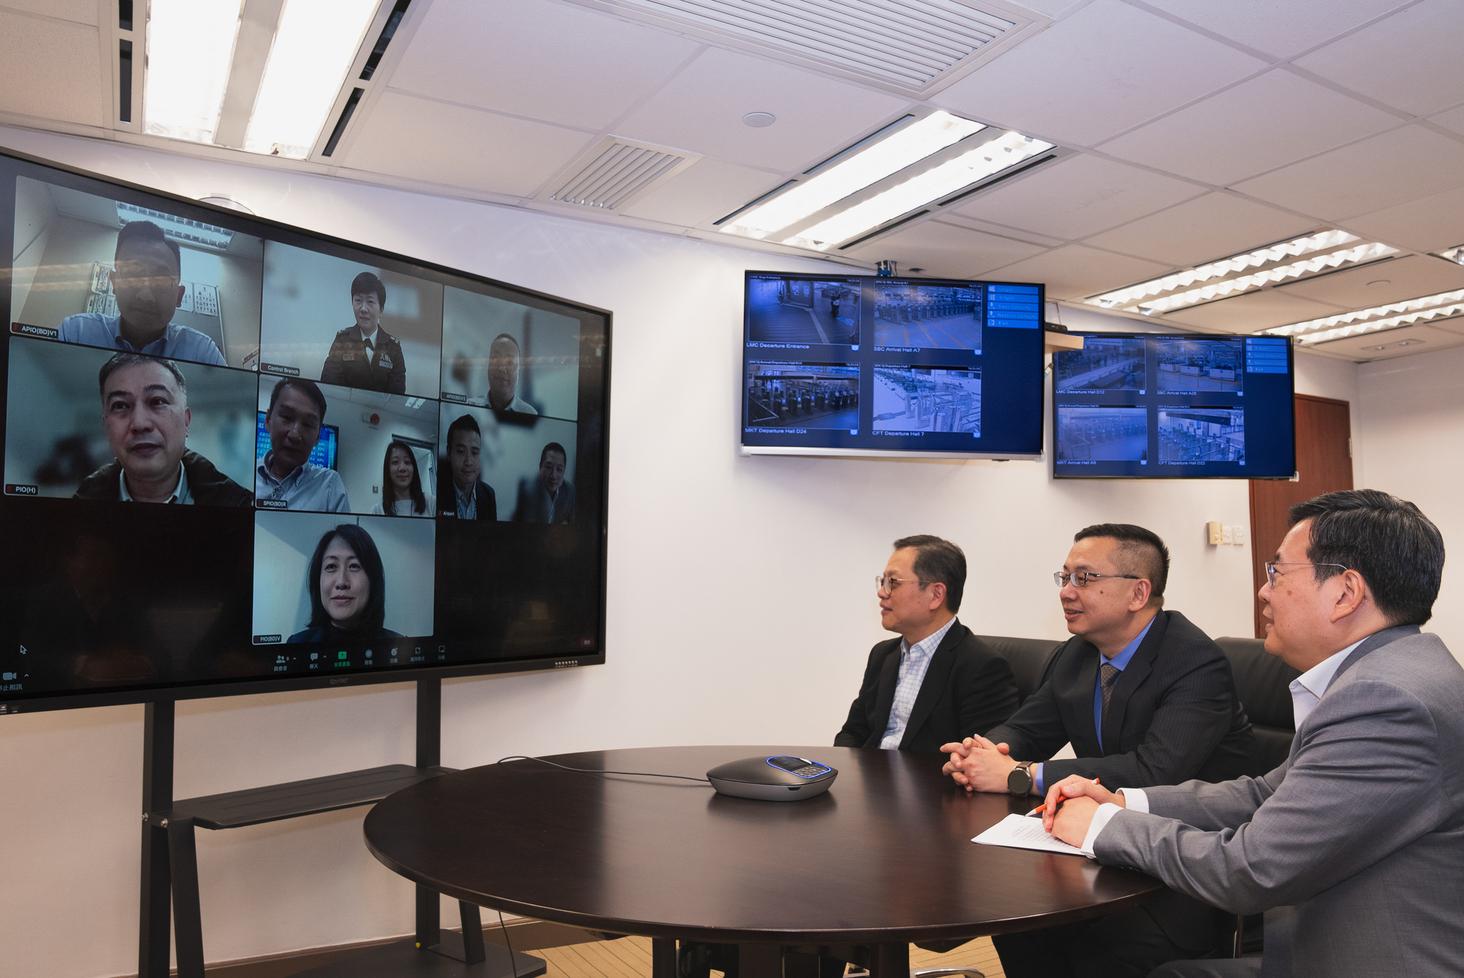 The Director of Immigration, Mr Benson Kwok (middle), held a video conference with commanders of control points on December 4 (Monday) to understand the preparation works for the polling day of the District Council election.